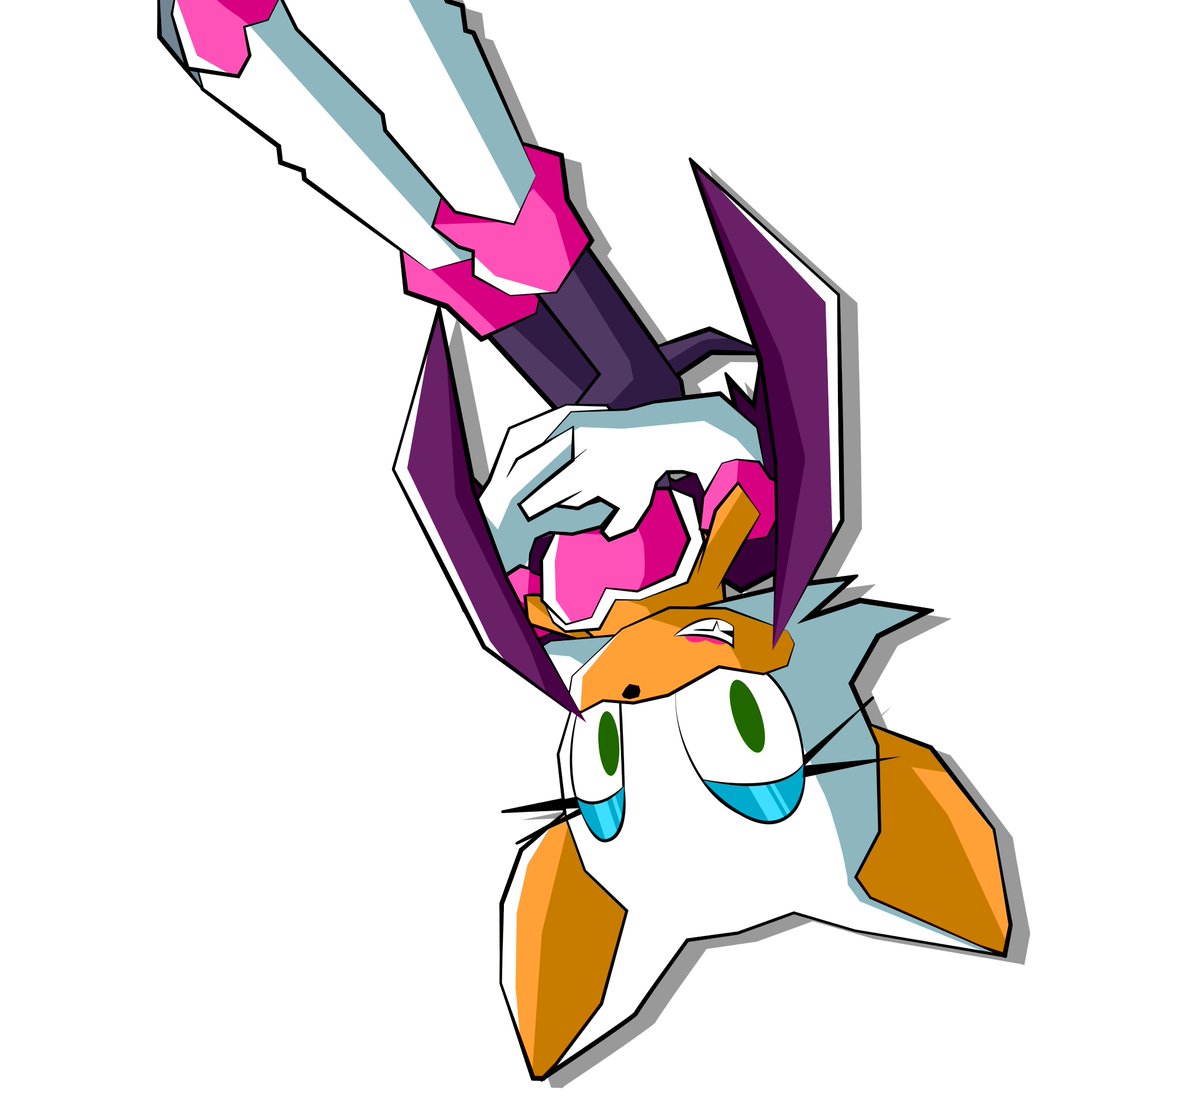 That one time Rouge was upside down like a bat